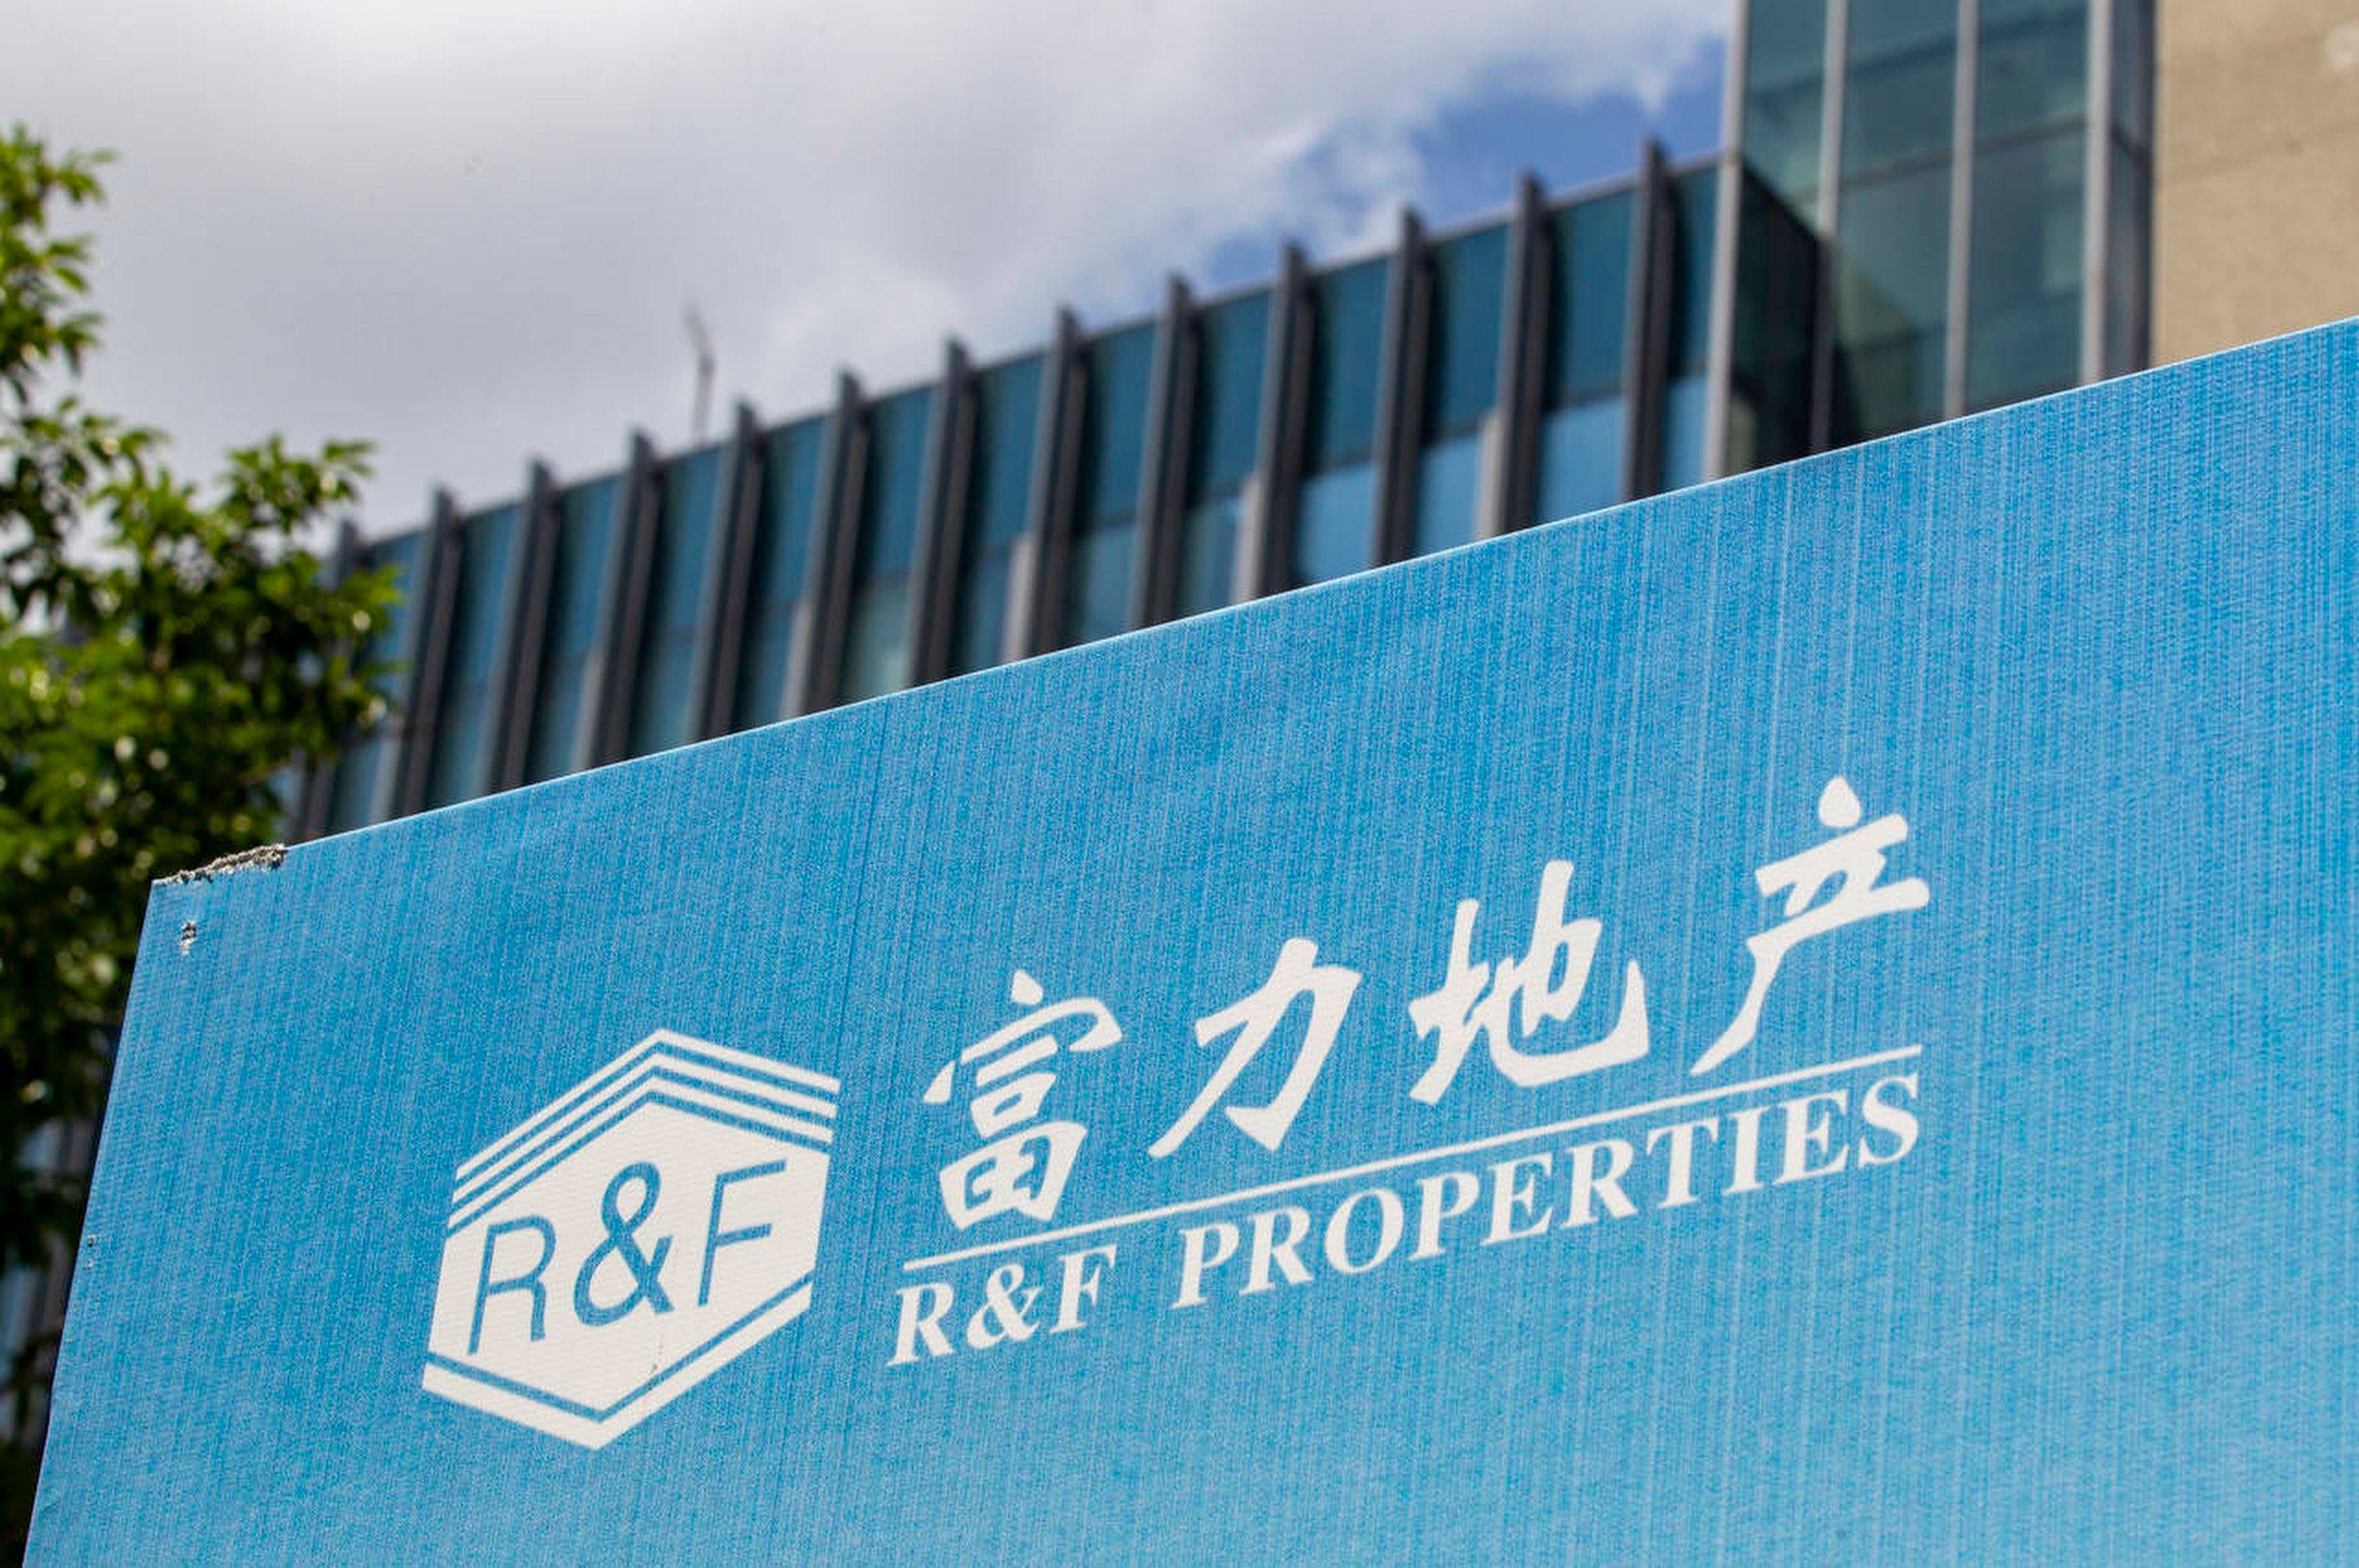 Several Hong Kong-listed Chinese property developers, including Guangzhou R&F Properties, risk being excluded from the Stock Connect programme as their valuations have fallen below the statutory minimum. Photo: SOHU